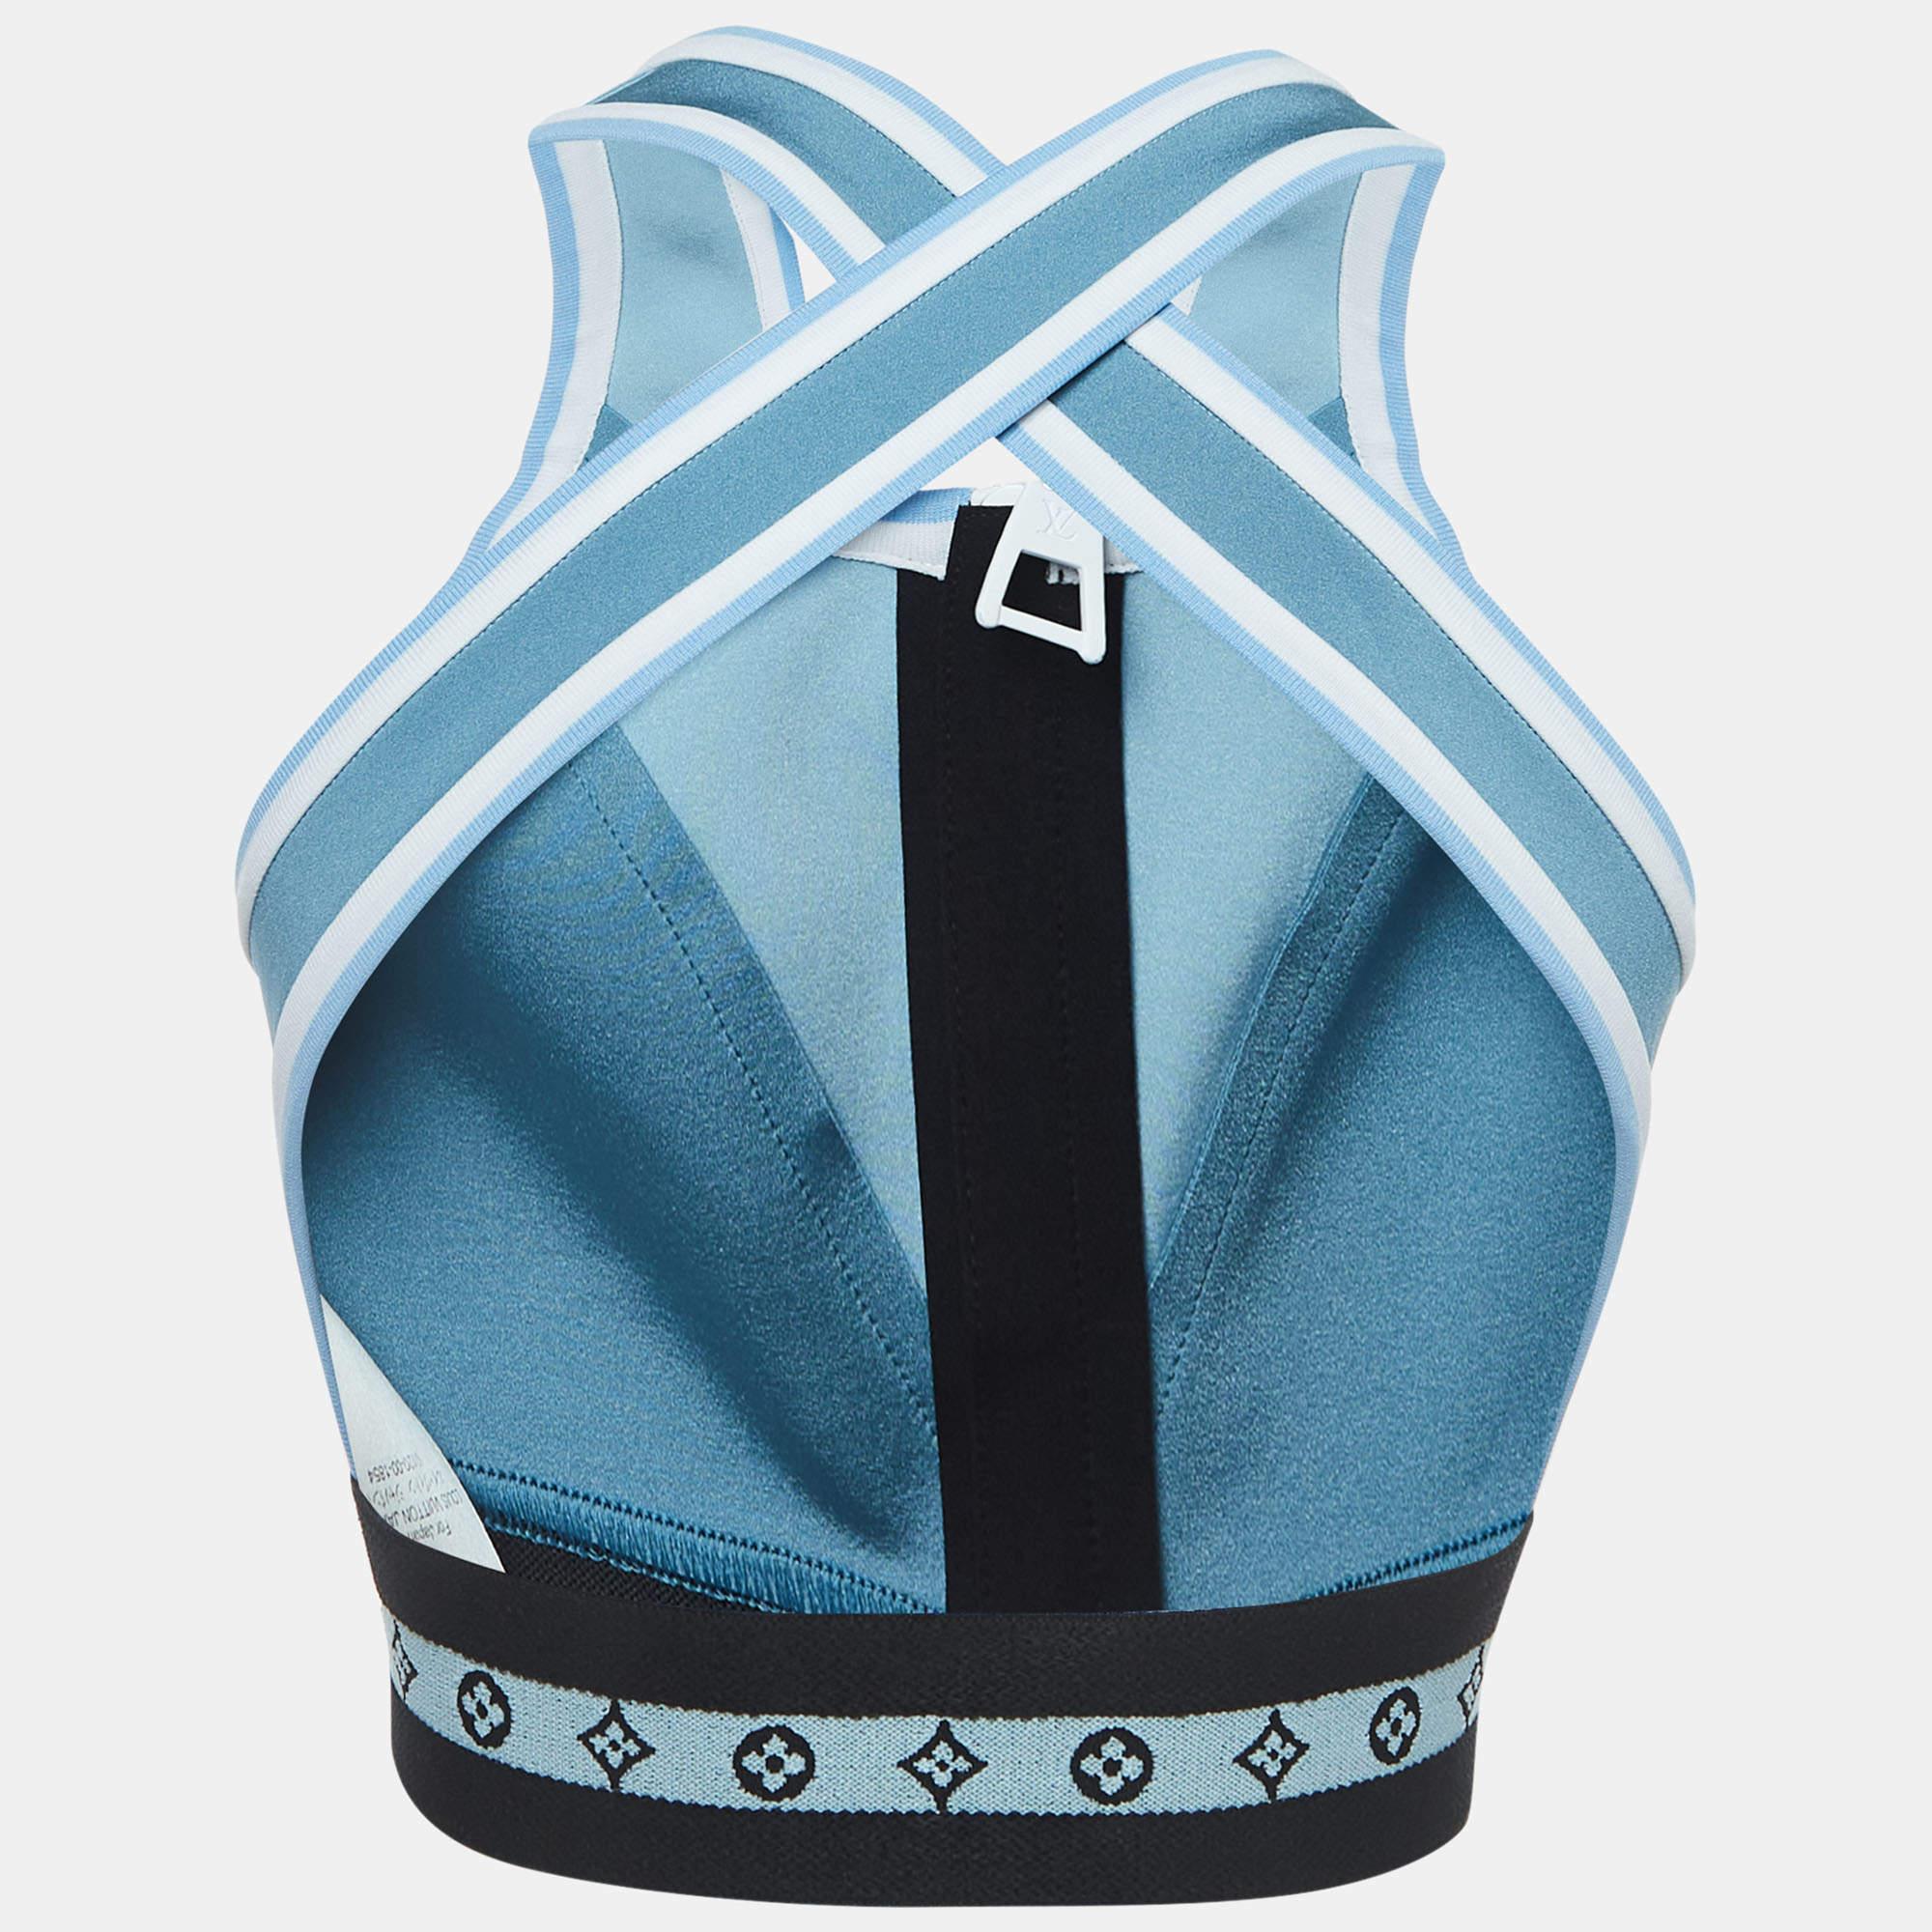 Louis Vuitton's activewear set comes carefully tailored using quality materials for the right fit, comfort, and durability. Presented in hues of blue and white, the set is highlighted with Monogram accents for a luxe look.

